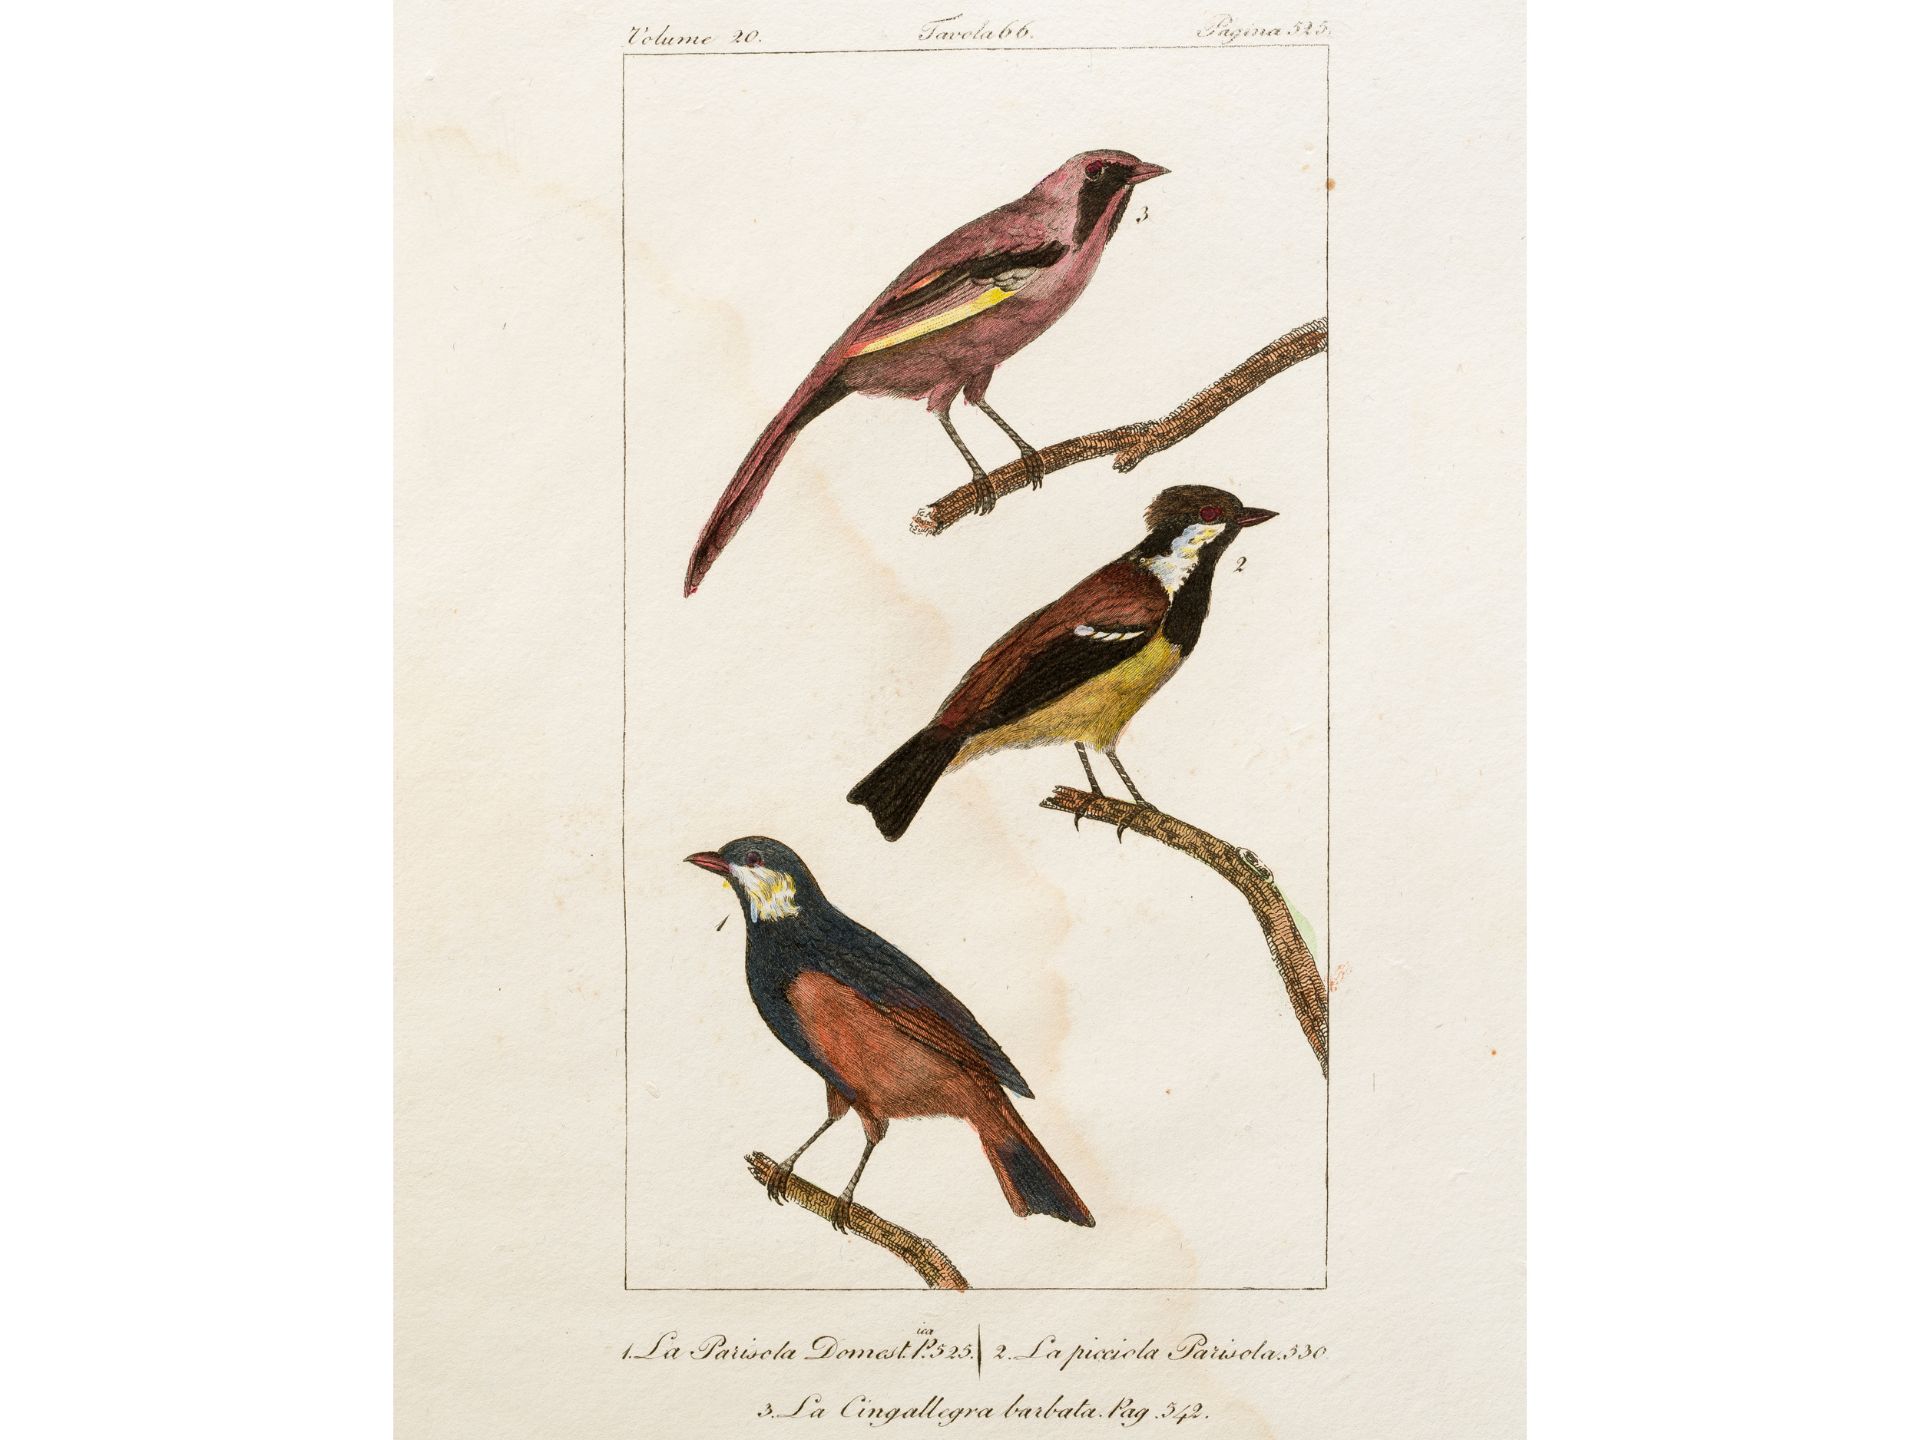 "Parisola" (3 subspecies), From an Italian treatise on bird species, Coloured engraving